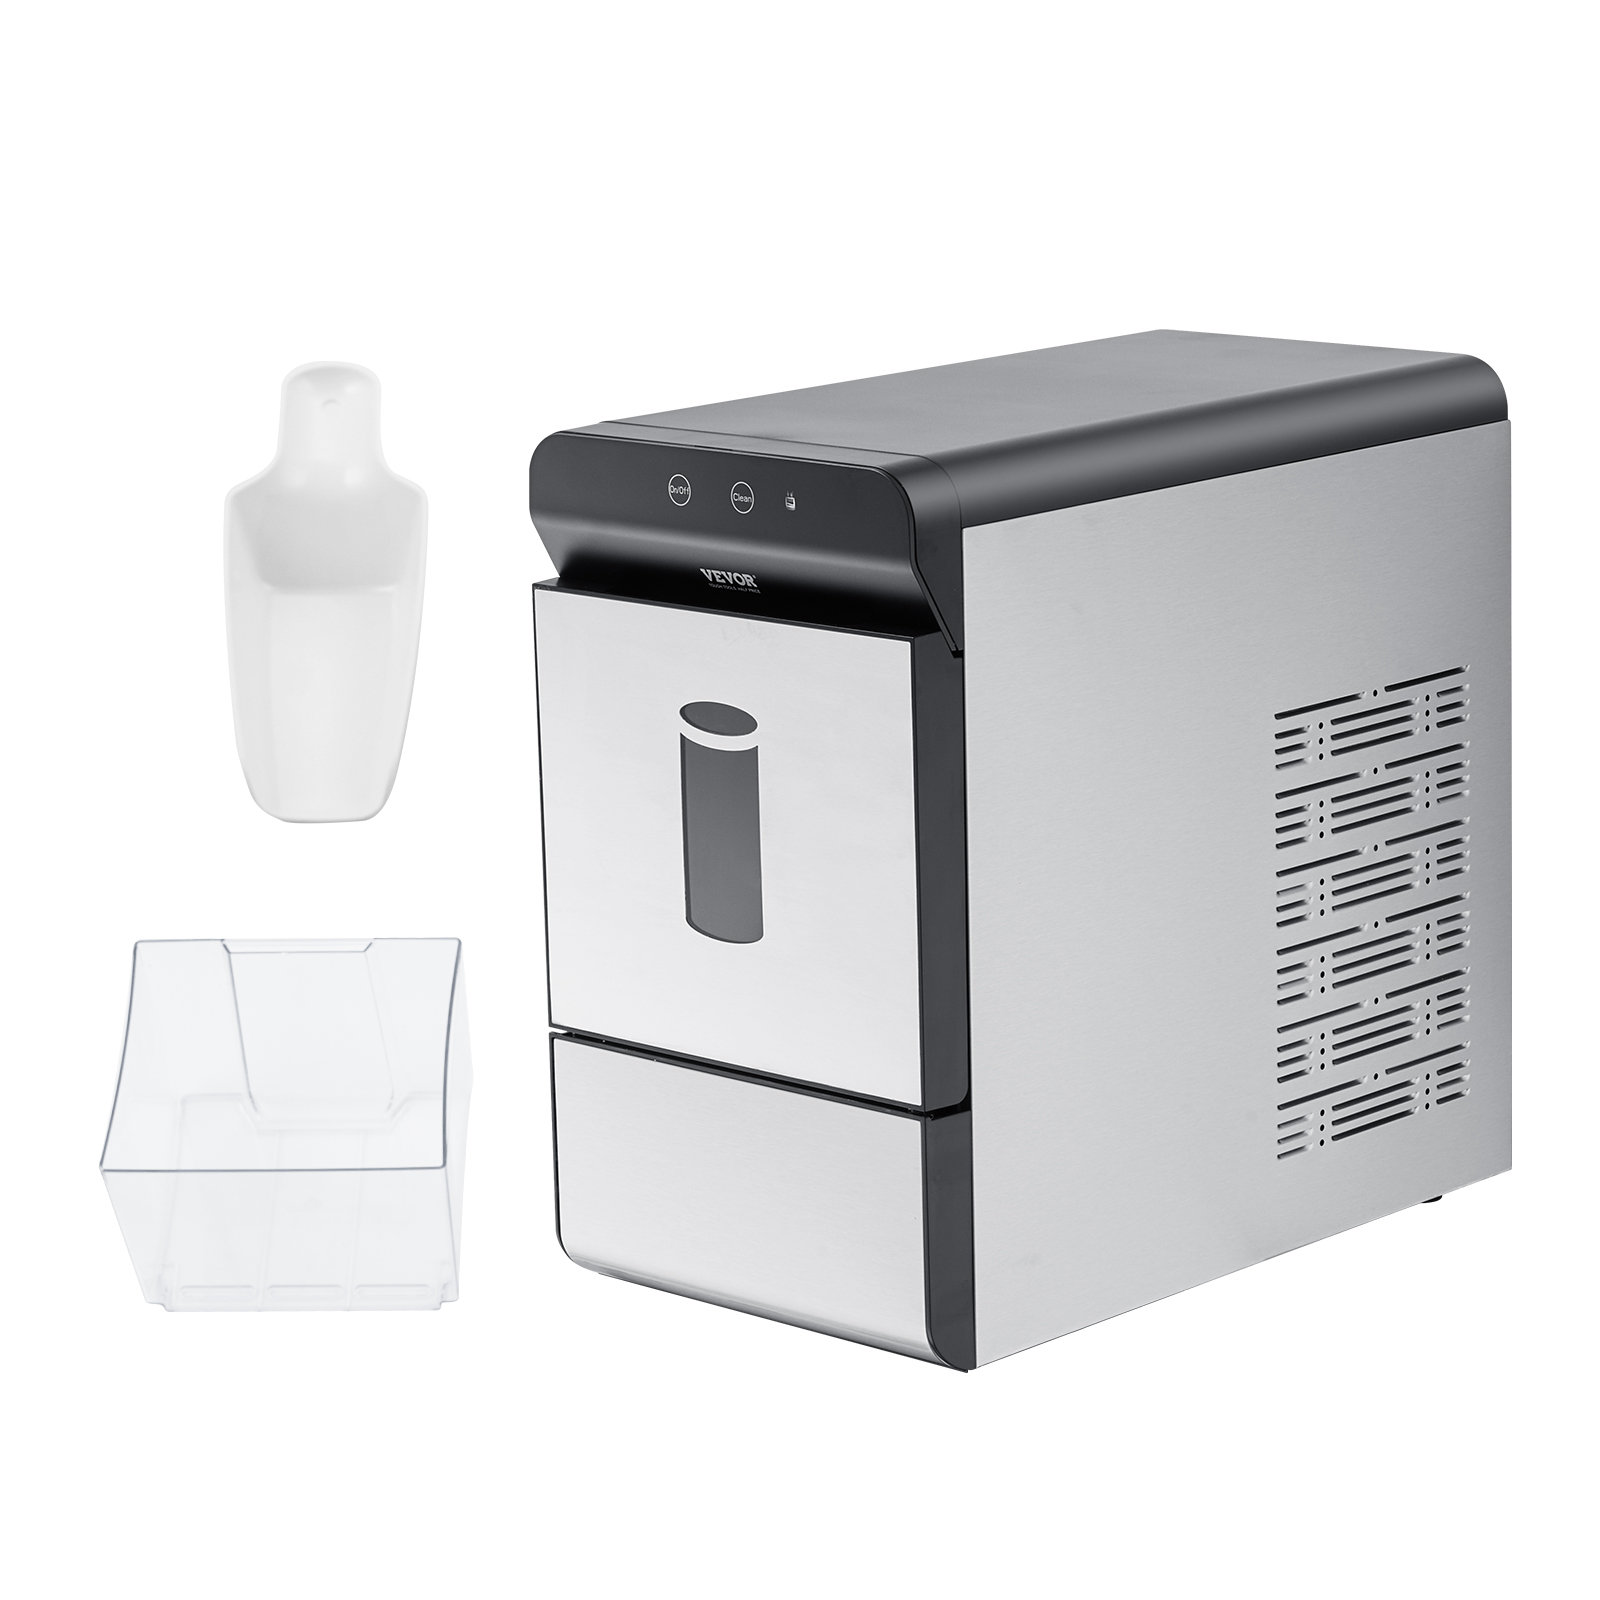 COWSAR 33 Lb. Daily Production Nugget Clear Ice Portable Ice Maker